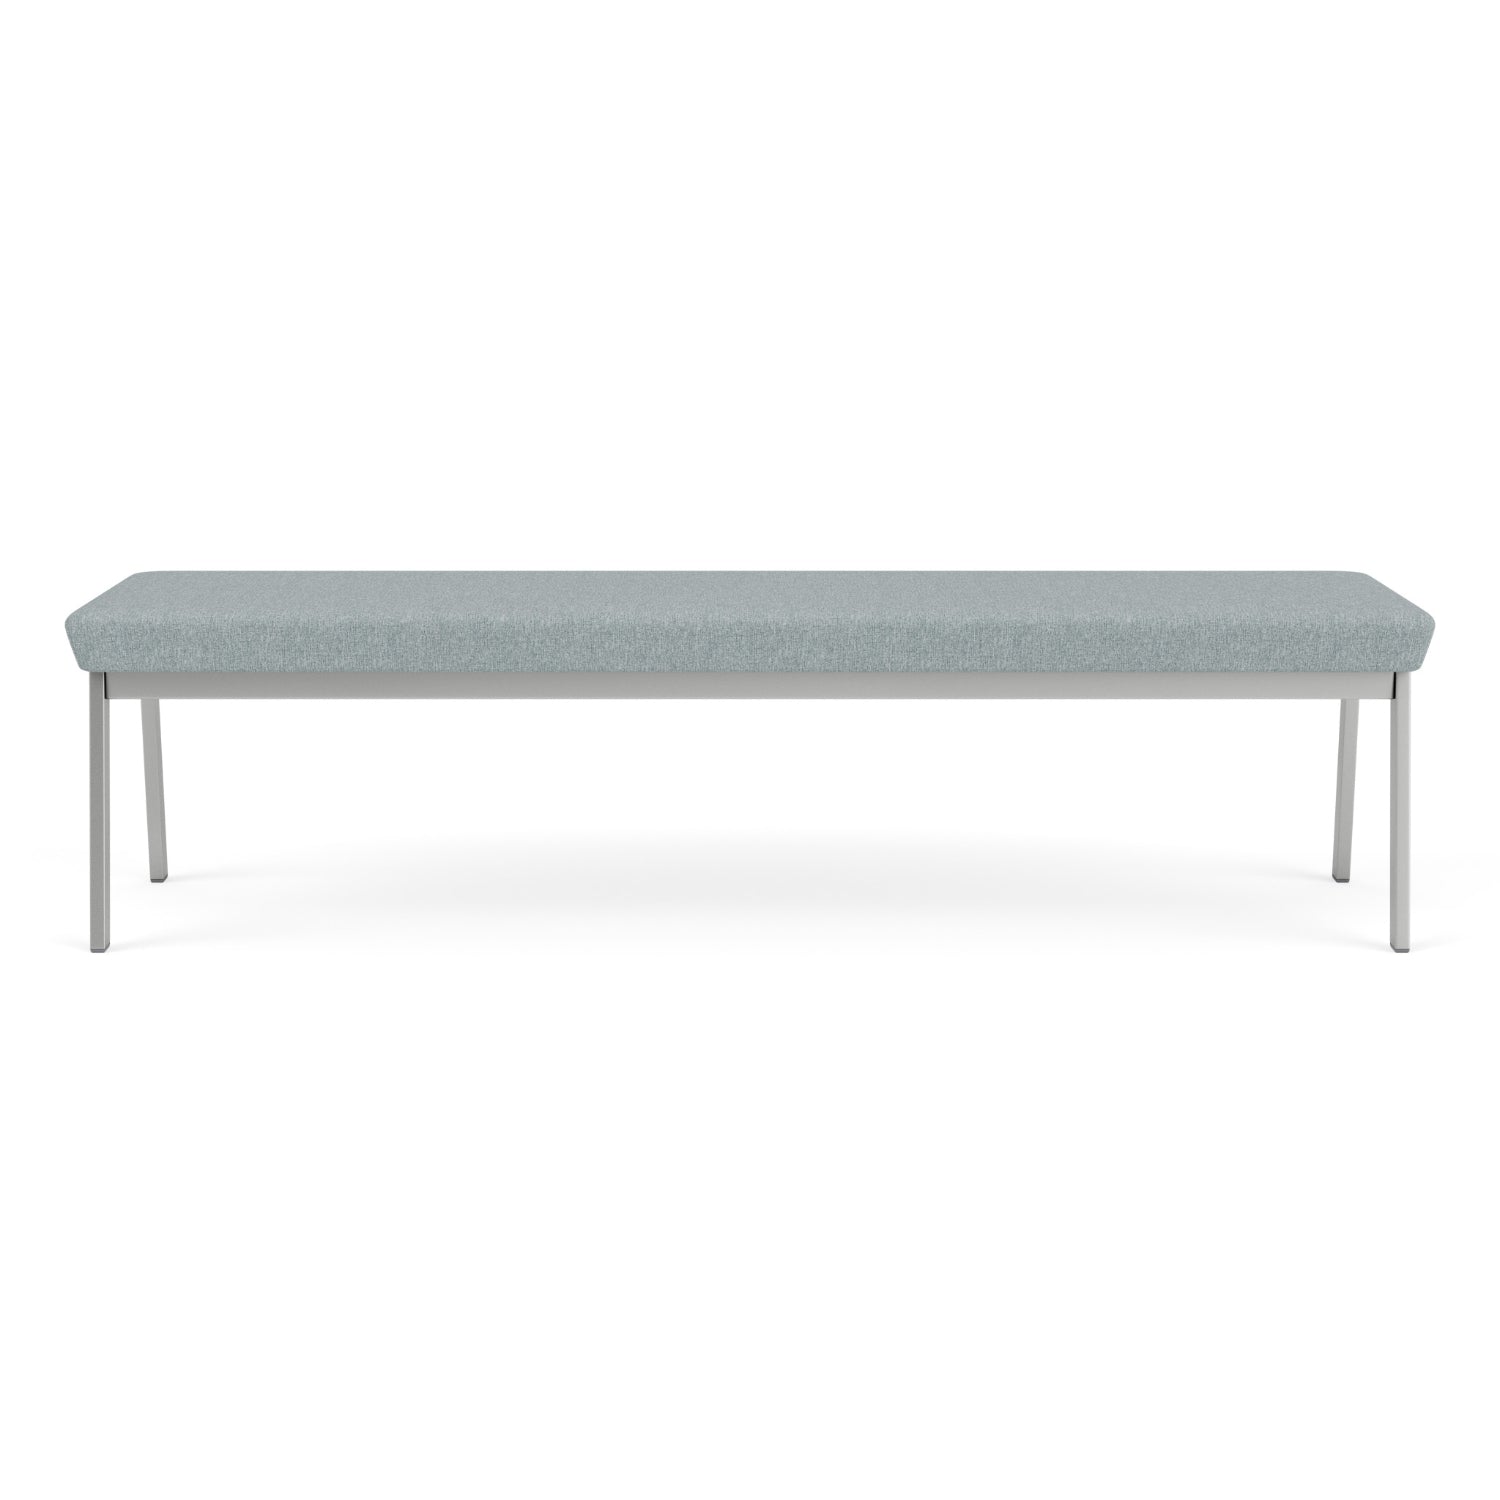 Newport Collection Reception Seating, 3 Seat Bench, Healthcare Vinyl Upholstery, FREE SHIPPING